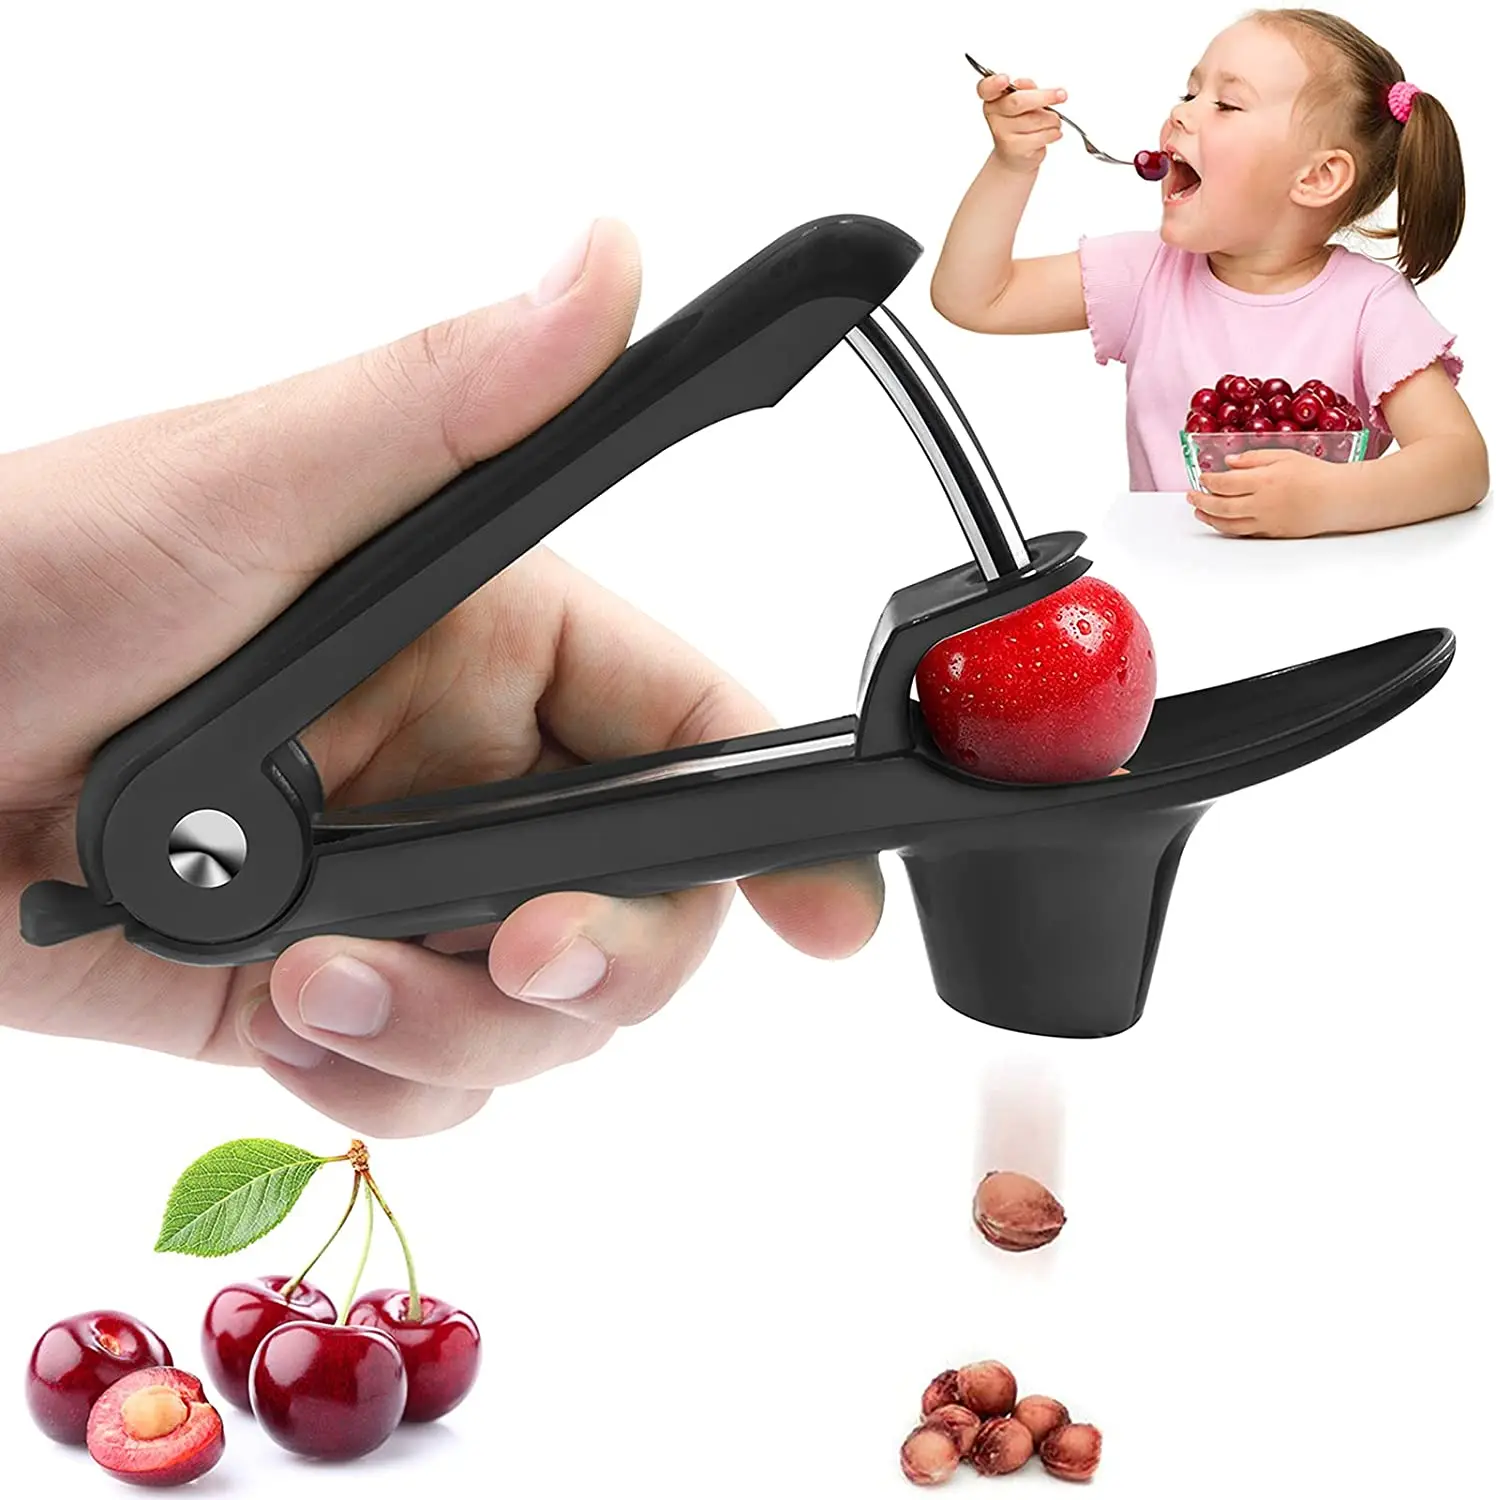 Cocktail,Jam for Cherry Pie Muffin Cherry Pitter,Cherry Pitter Tool,Cherry Core Remover Tool,Portable Cherry Pitter Tool Kitchen with Space-Saving Lock Design green 